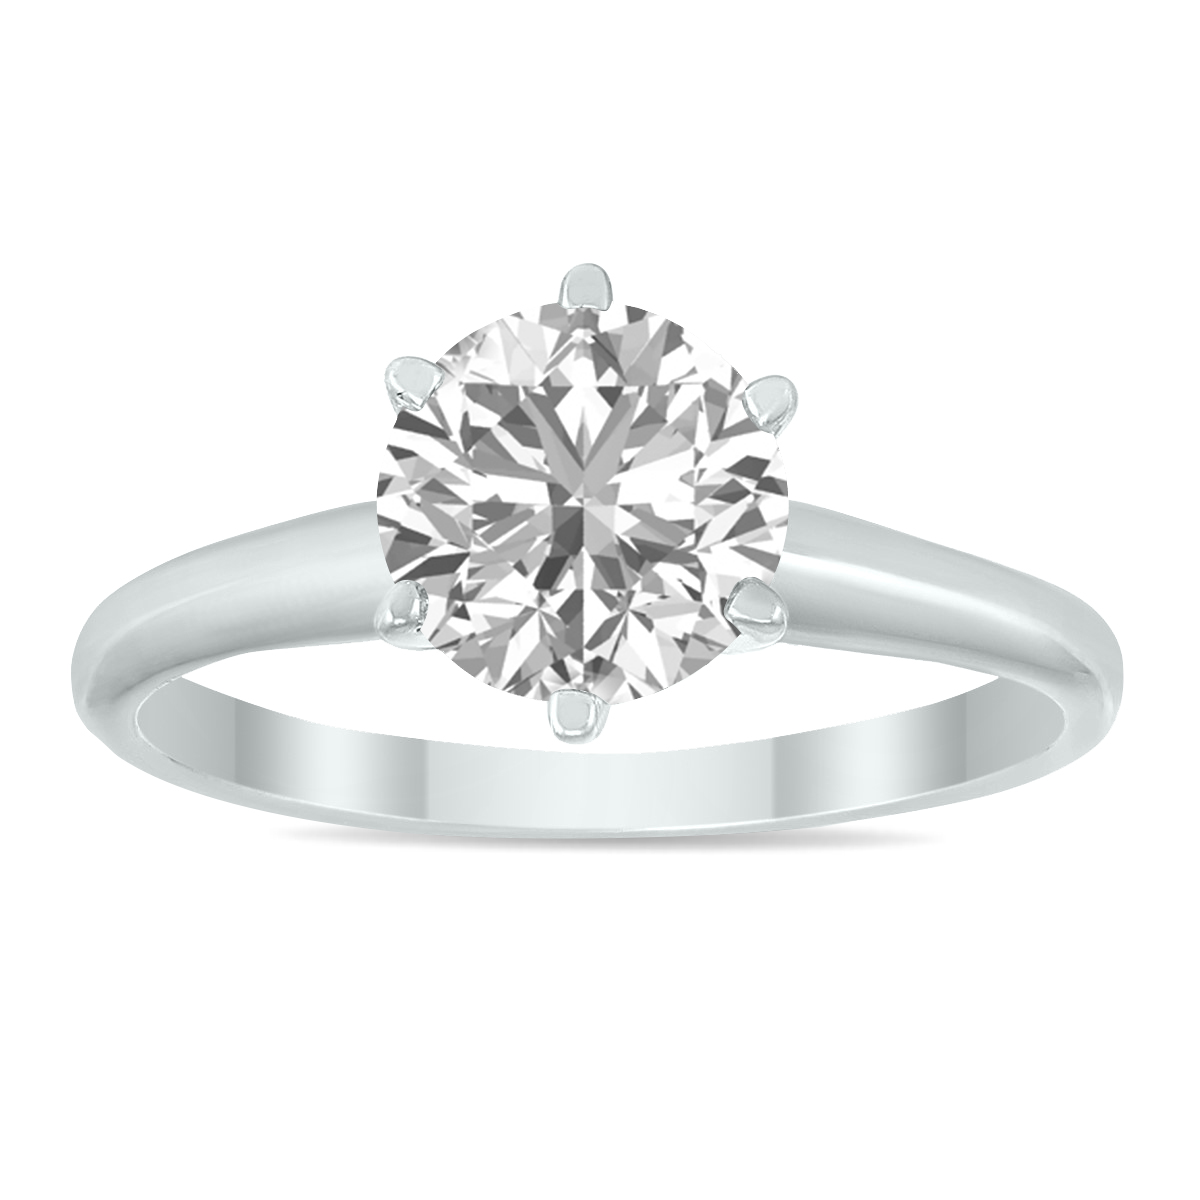 Image of IGI Certified Lab Grown 1 1/10 Carat Diamond Solitaire Ring in 14K White Gold (H Color VS2 Clarity)